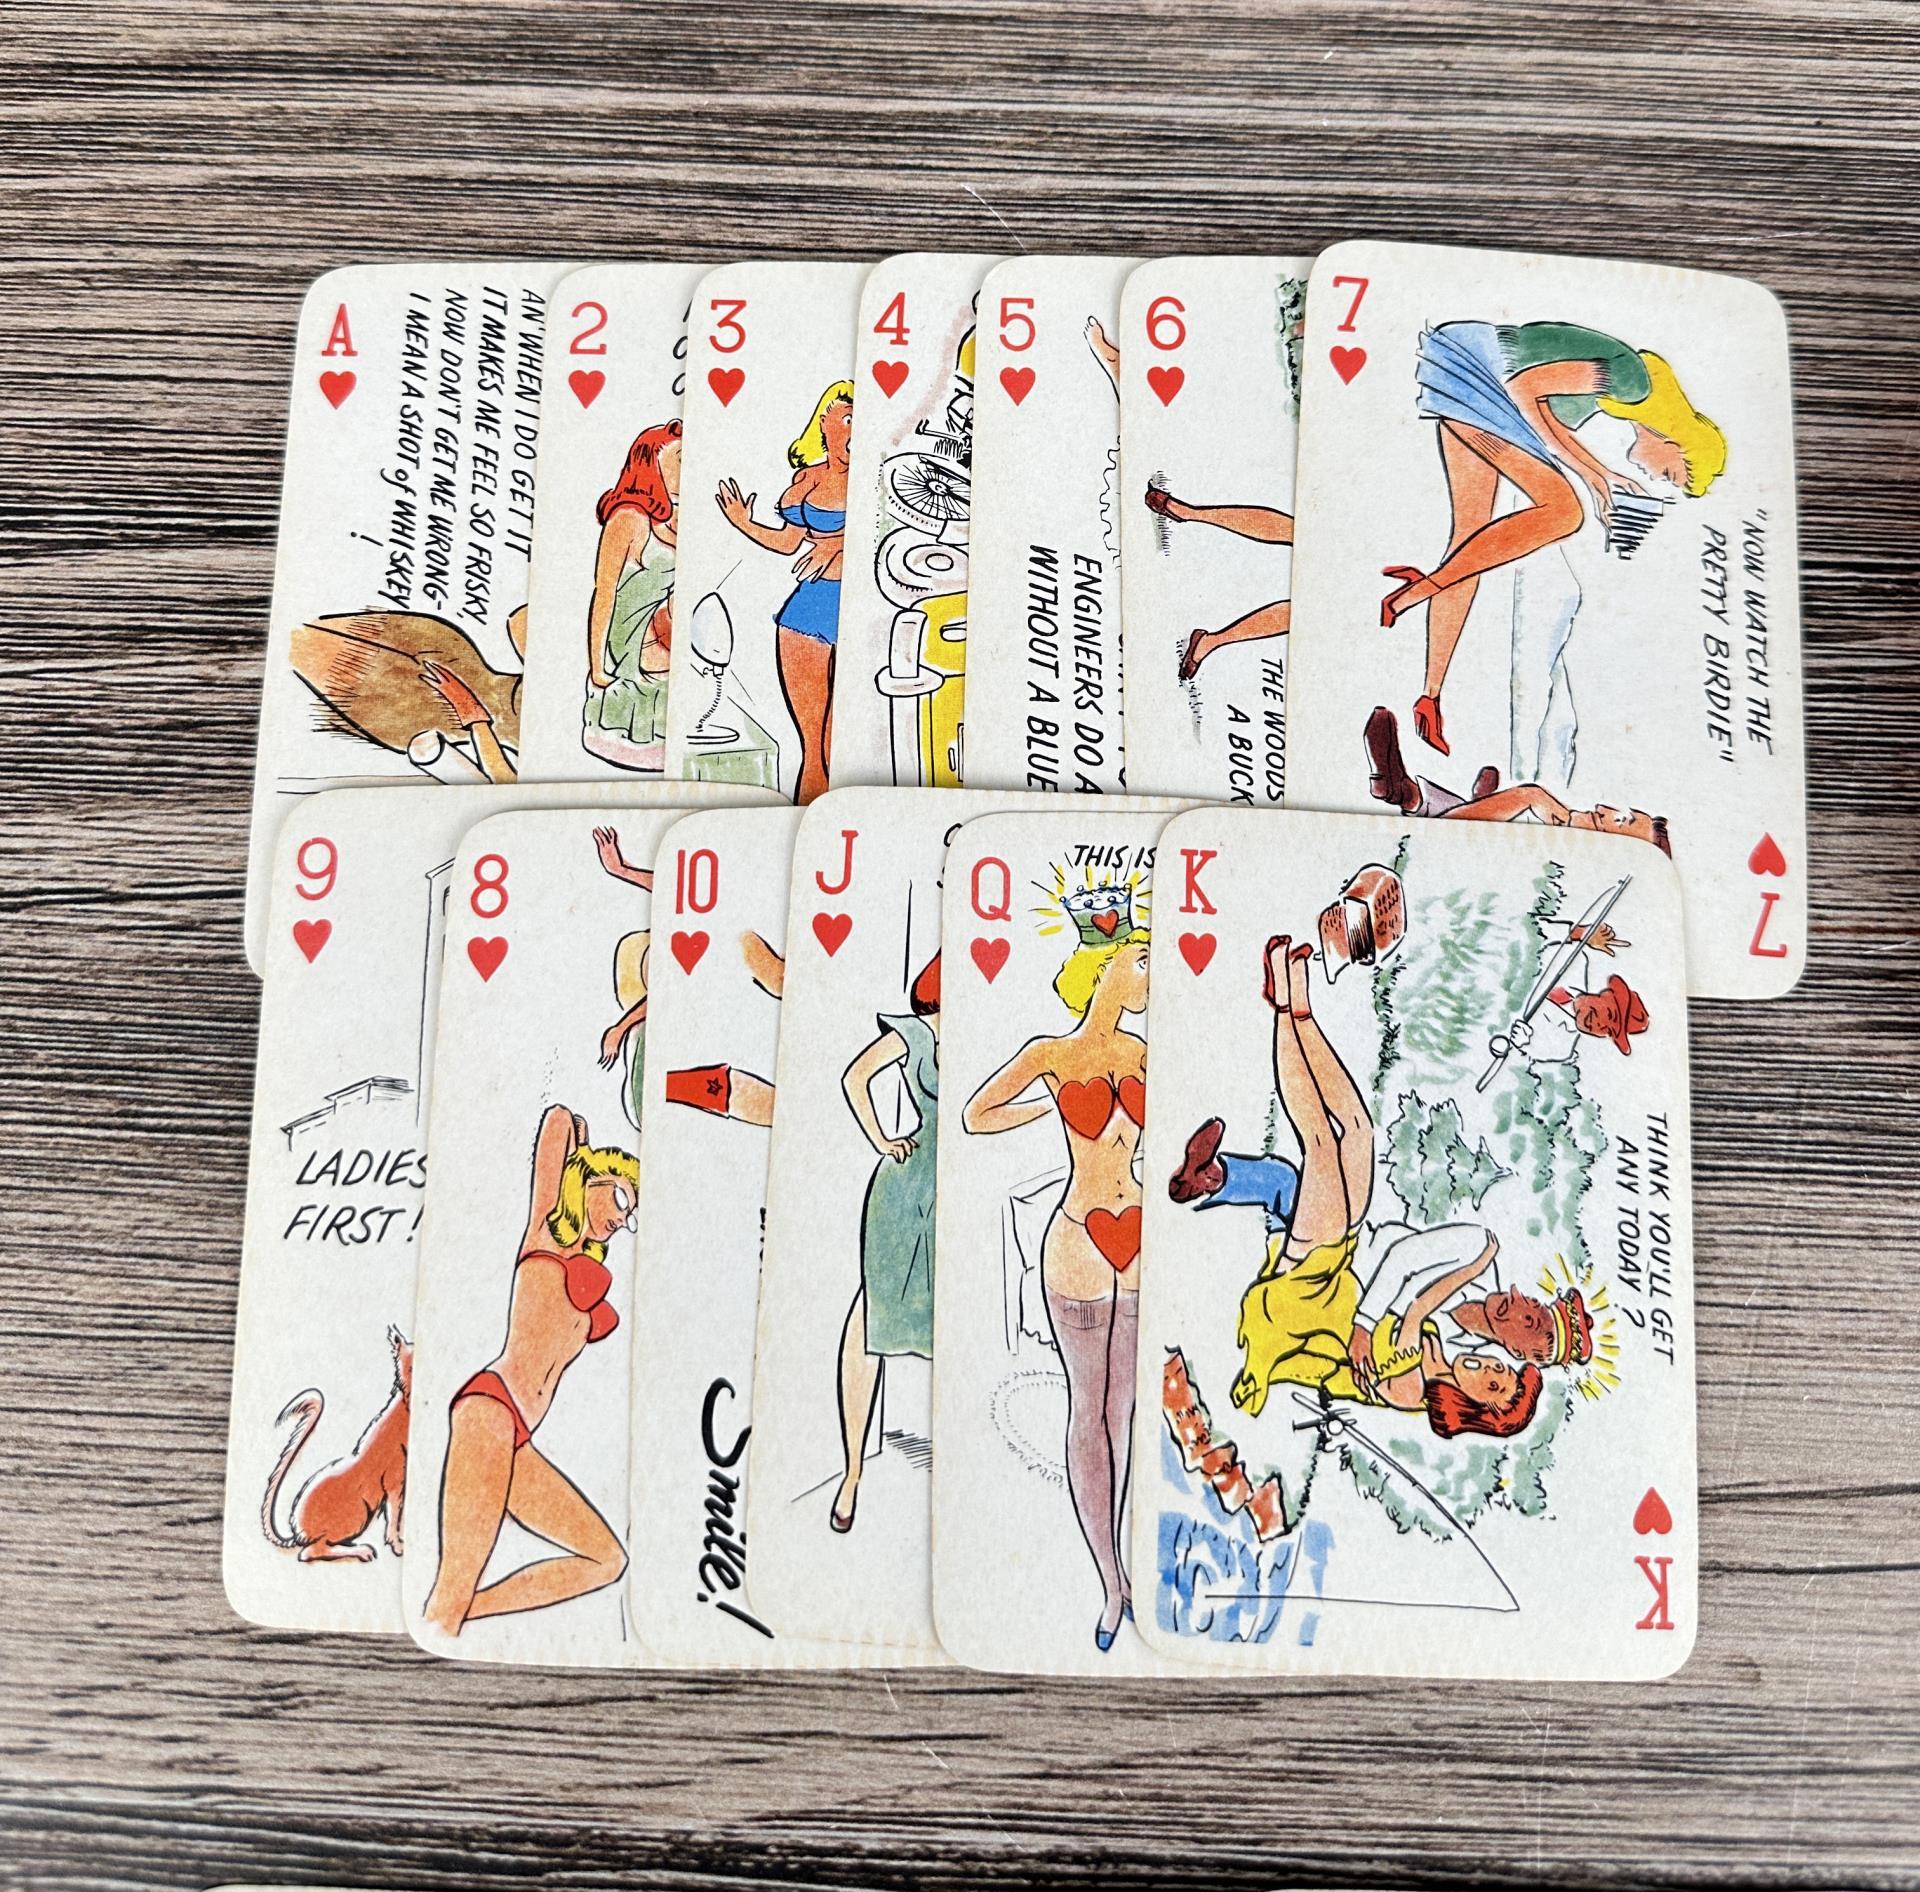 Risque Stag Playing Card Deck